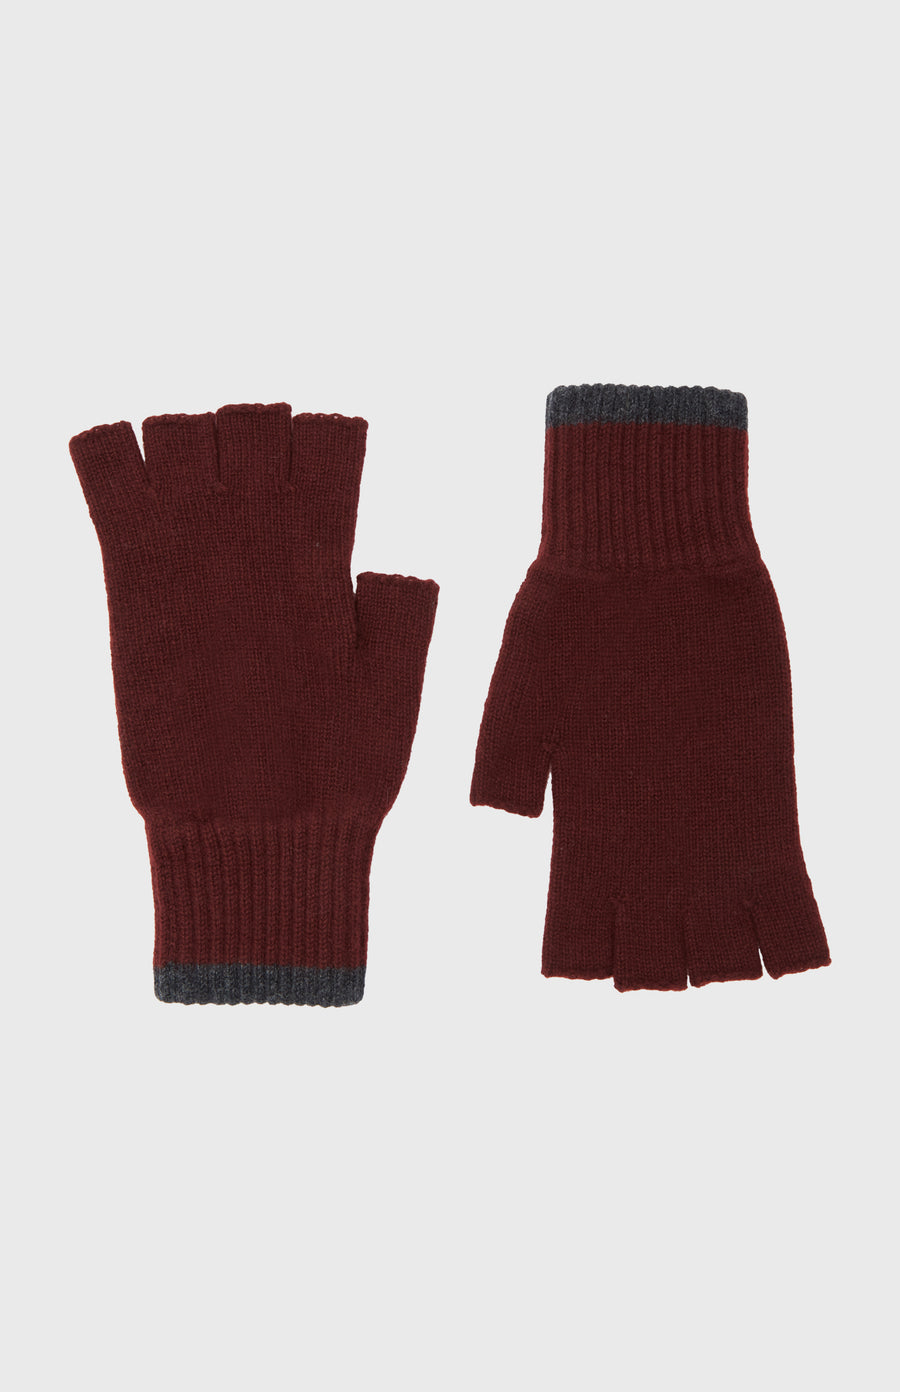 Cashmere Fingerless Gloves in Dark Claret and Charcoal - Pringle of Scotland